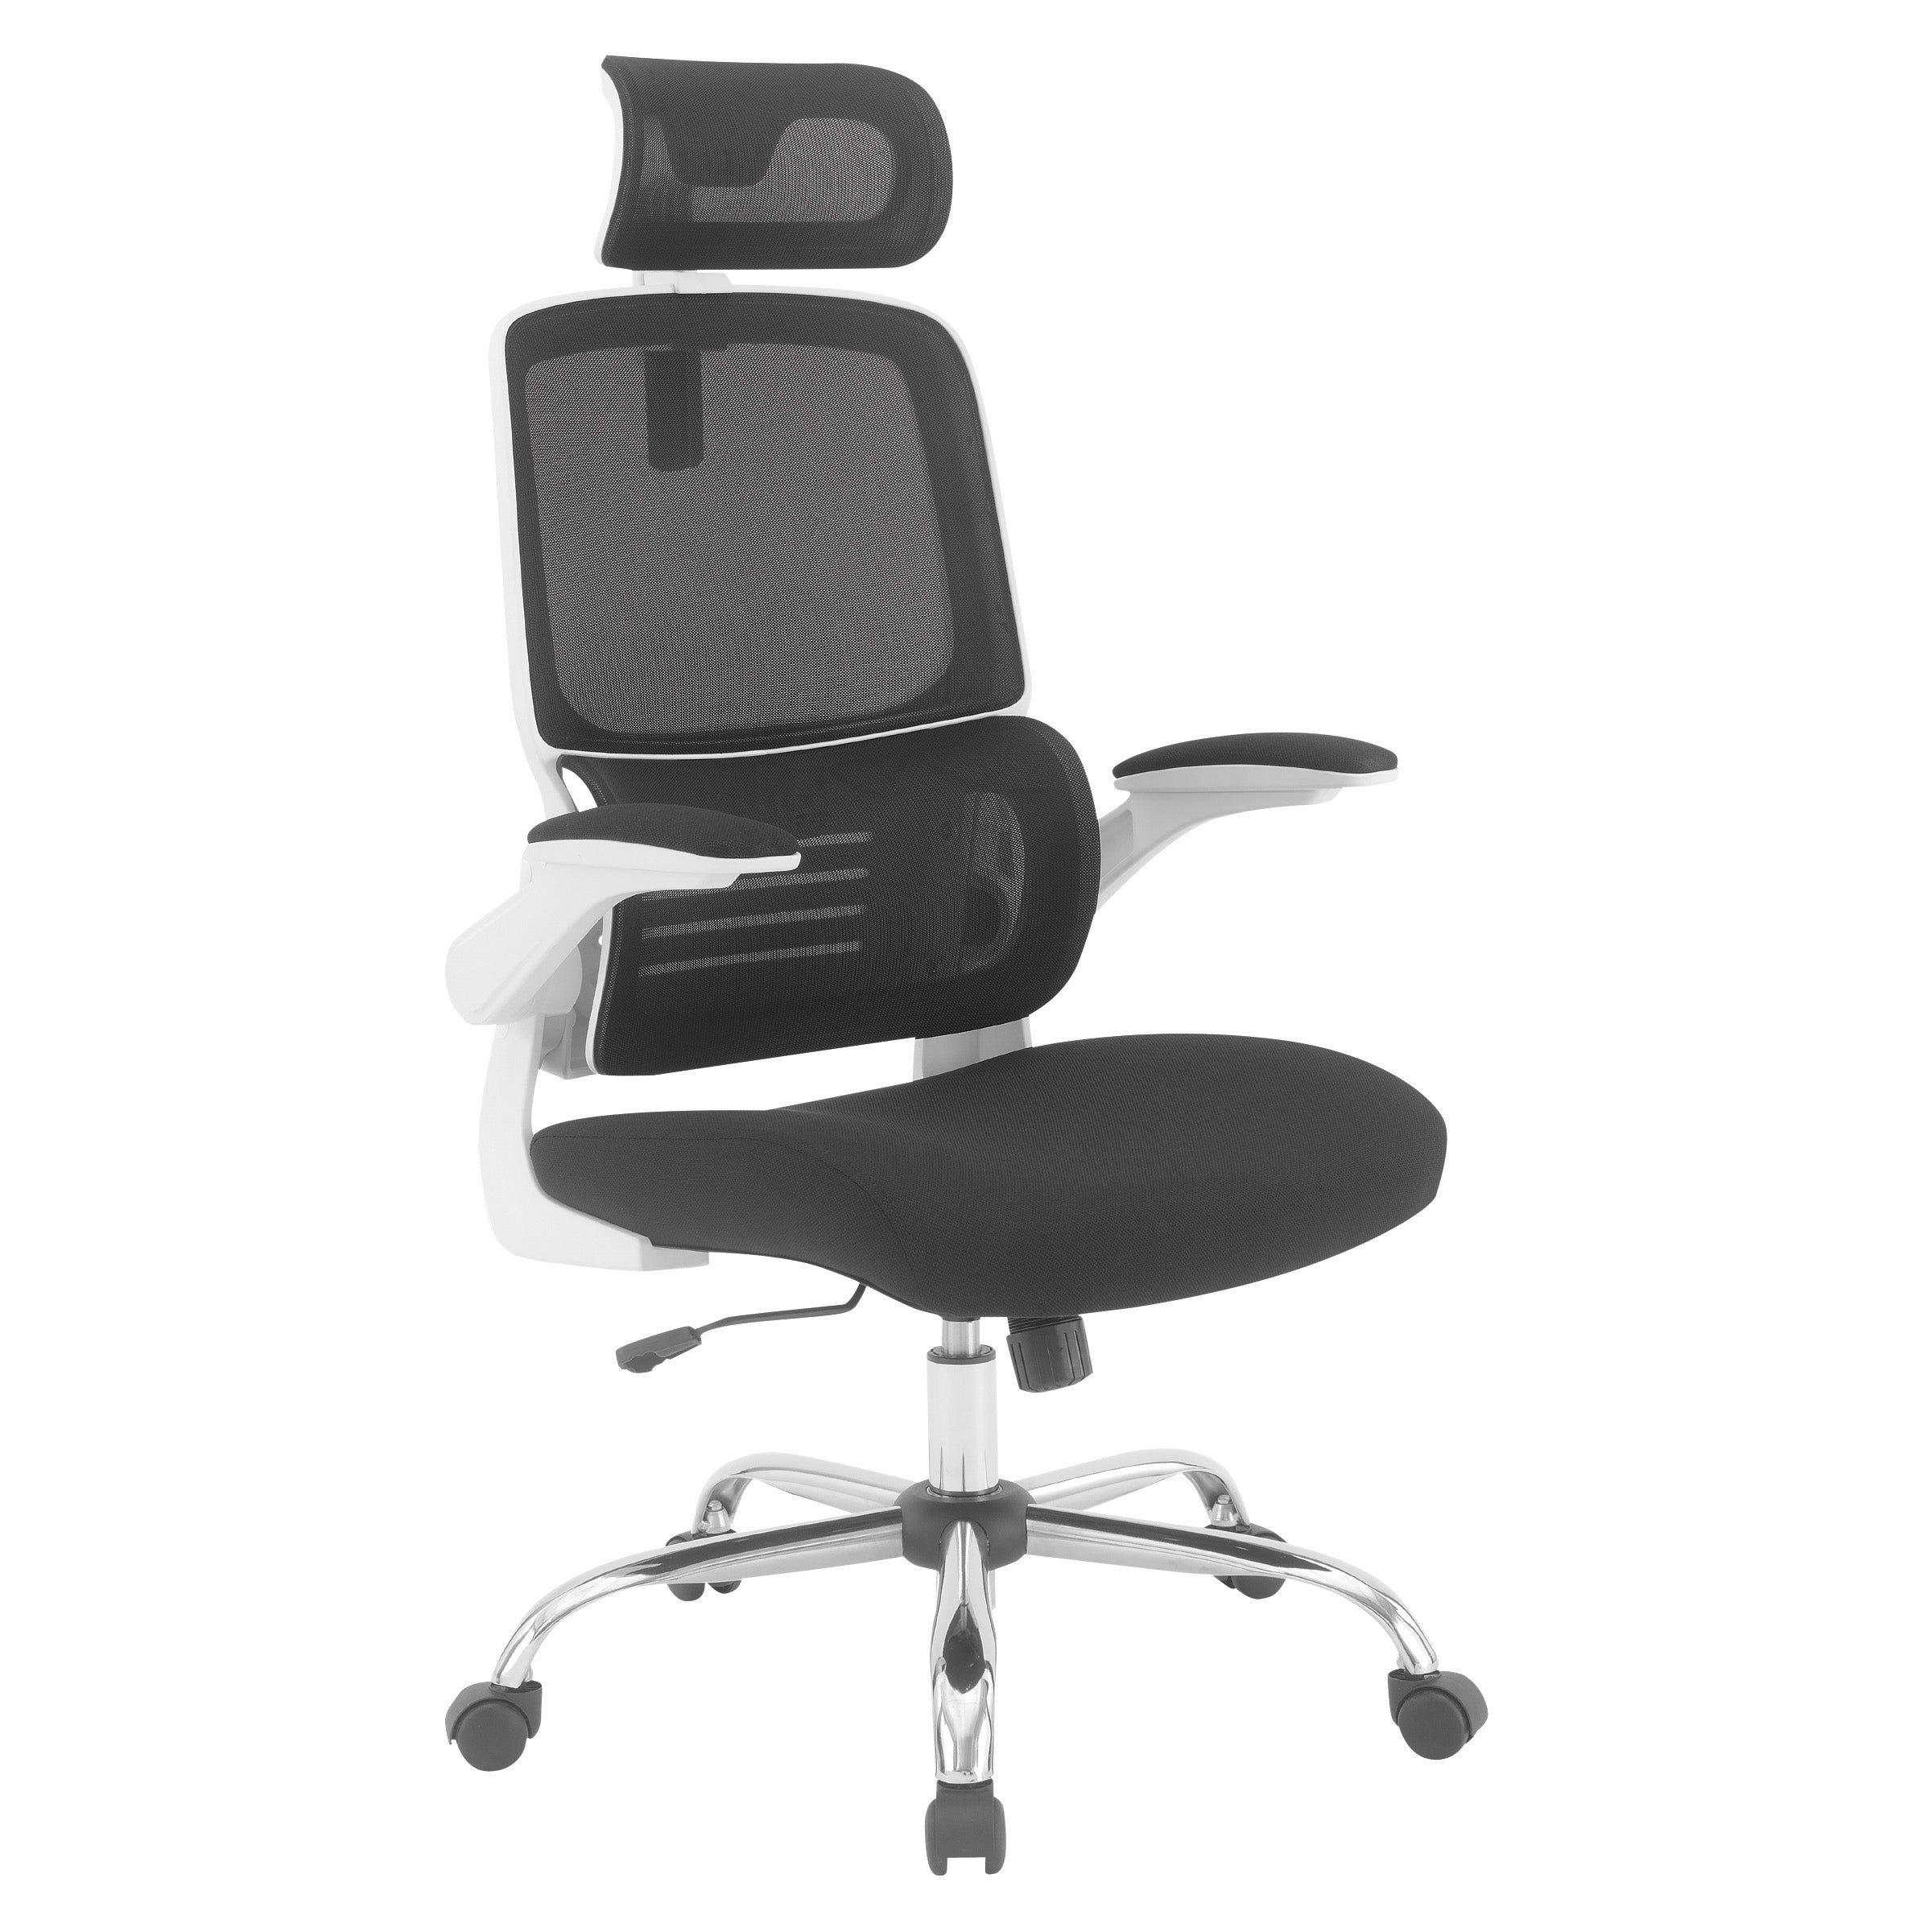 EMW60020CHR - Mesh Back Manager's Chair with White Frame & Adjustable Headrest